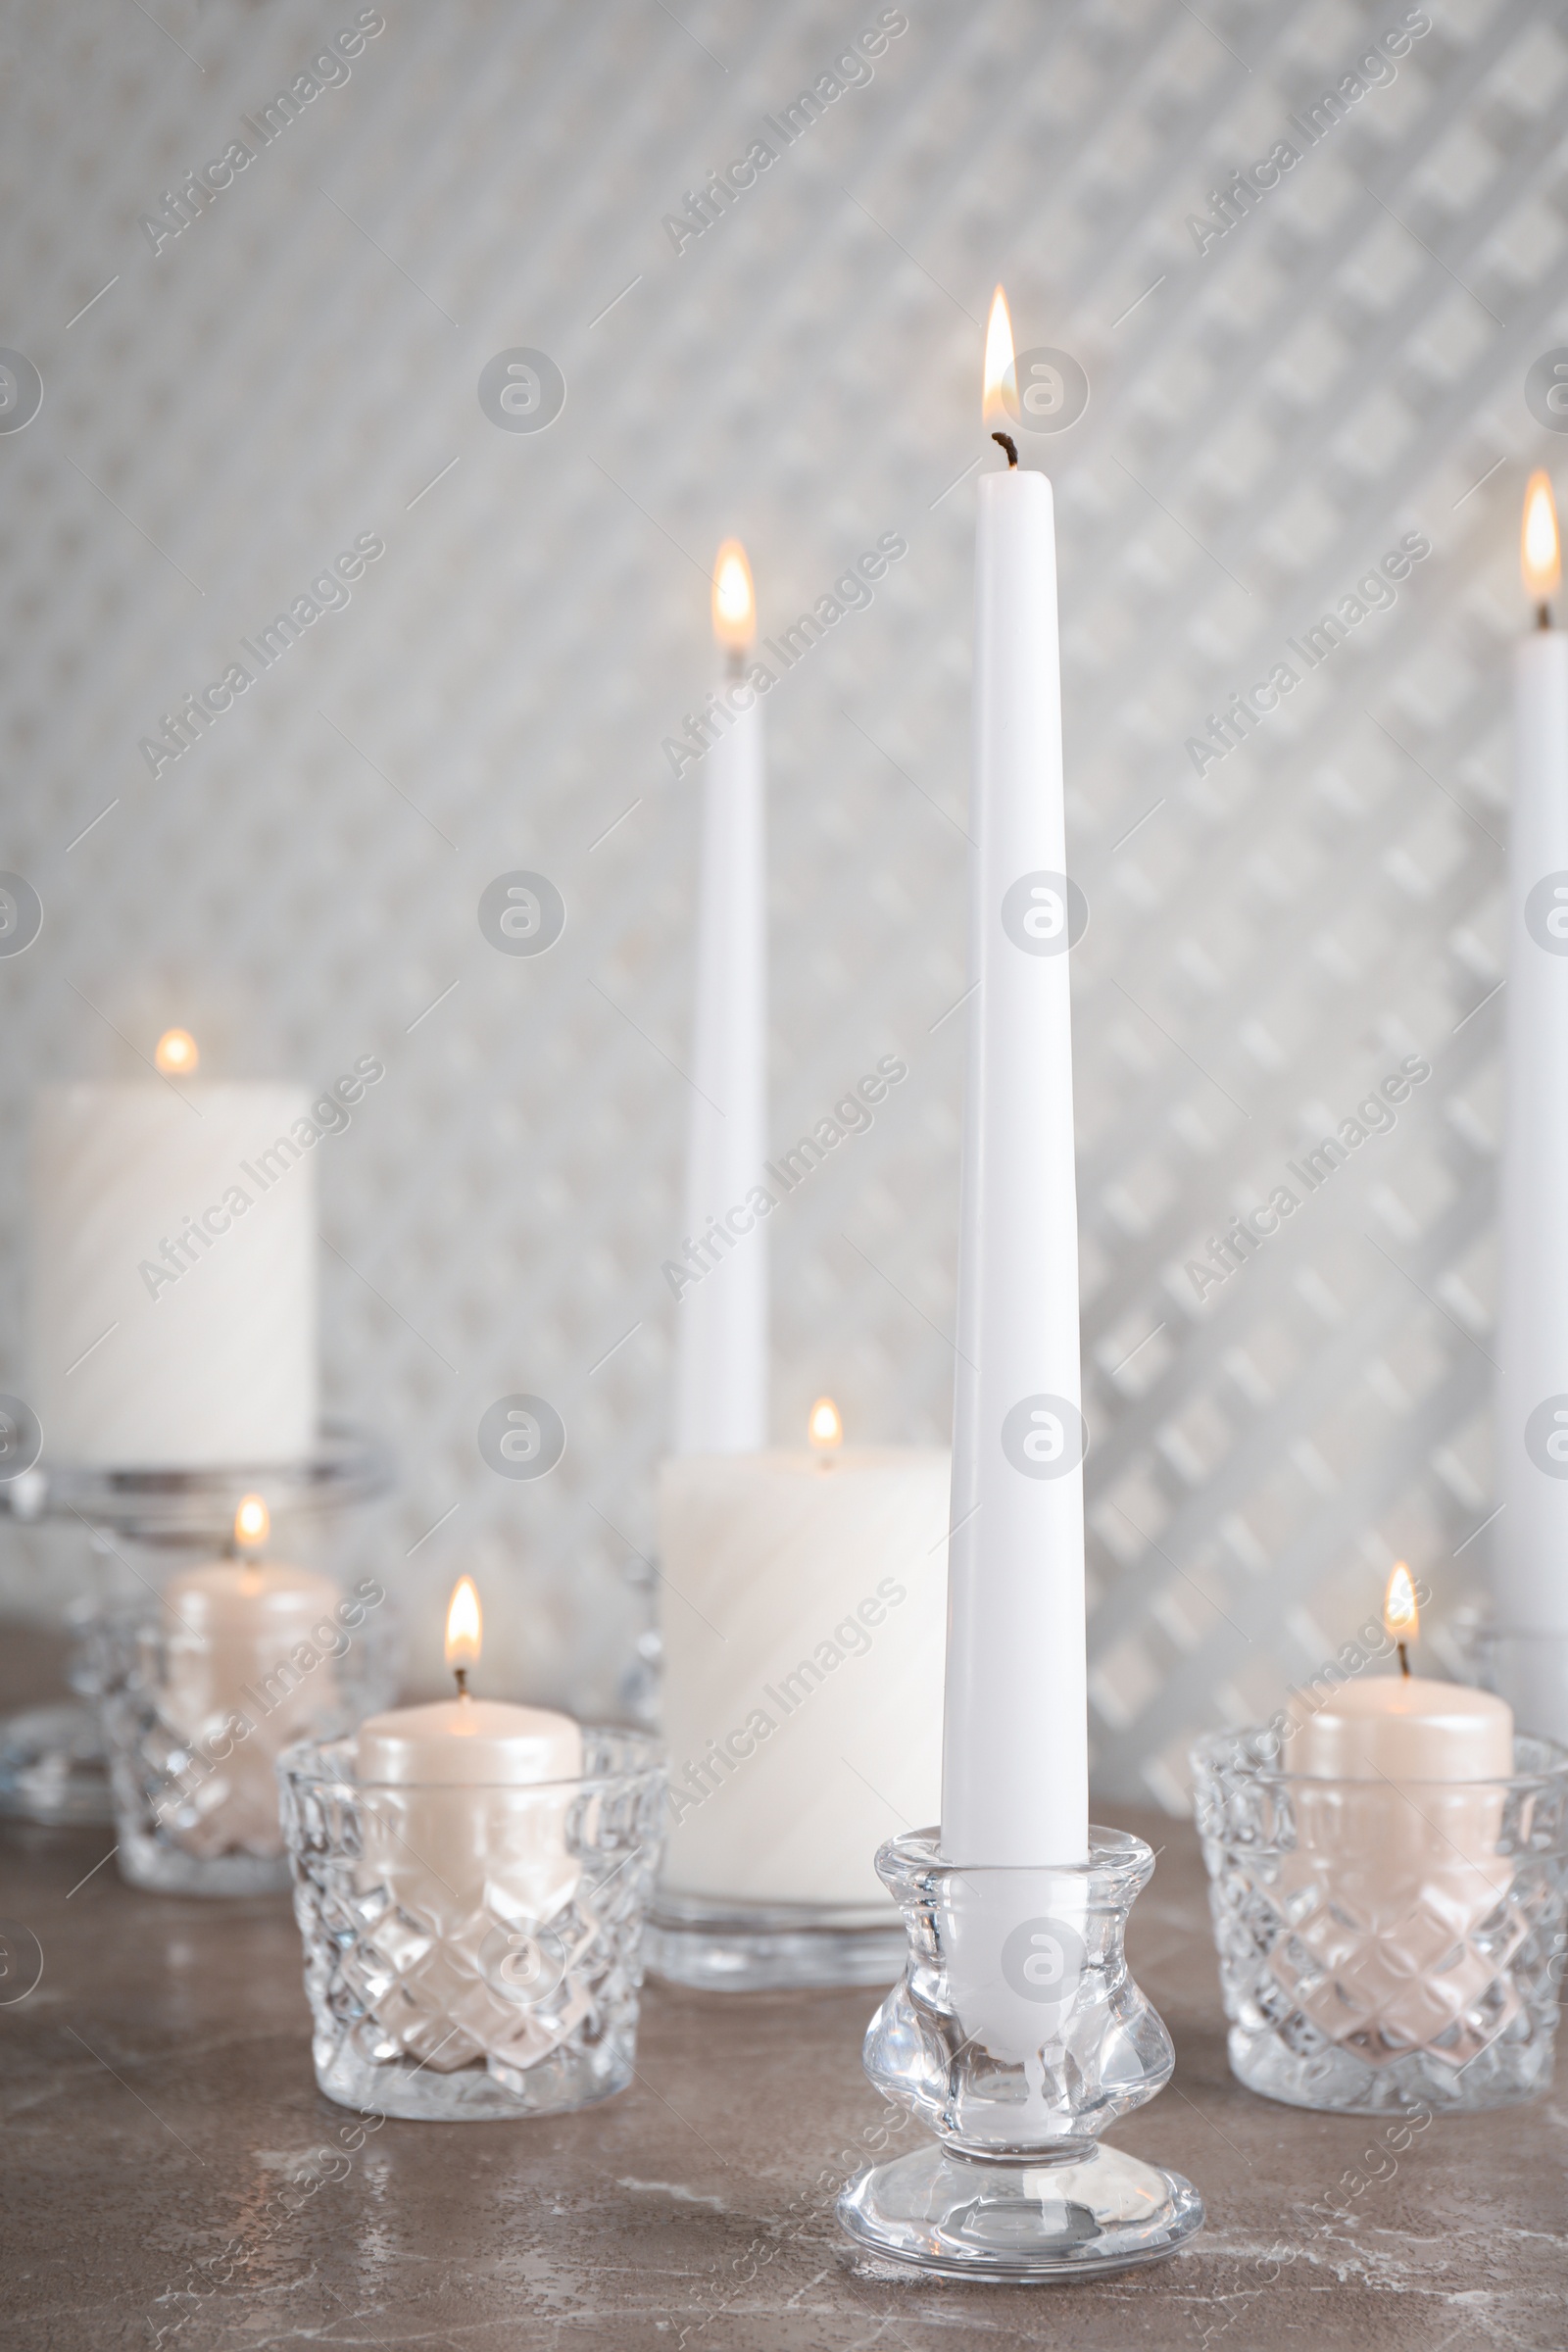 Photo of Elegant candlesticks with burning candles on marble table